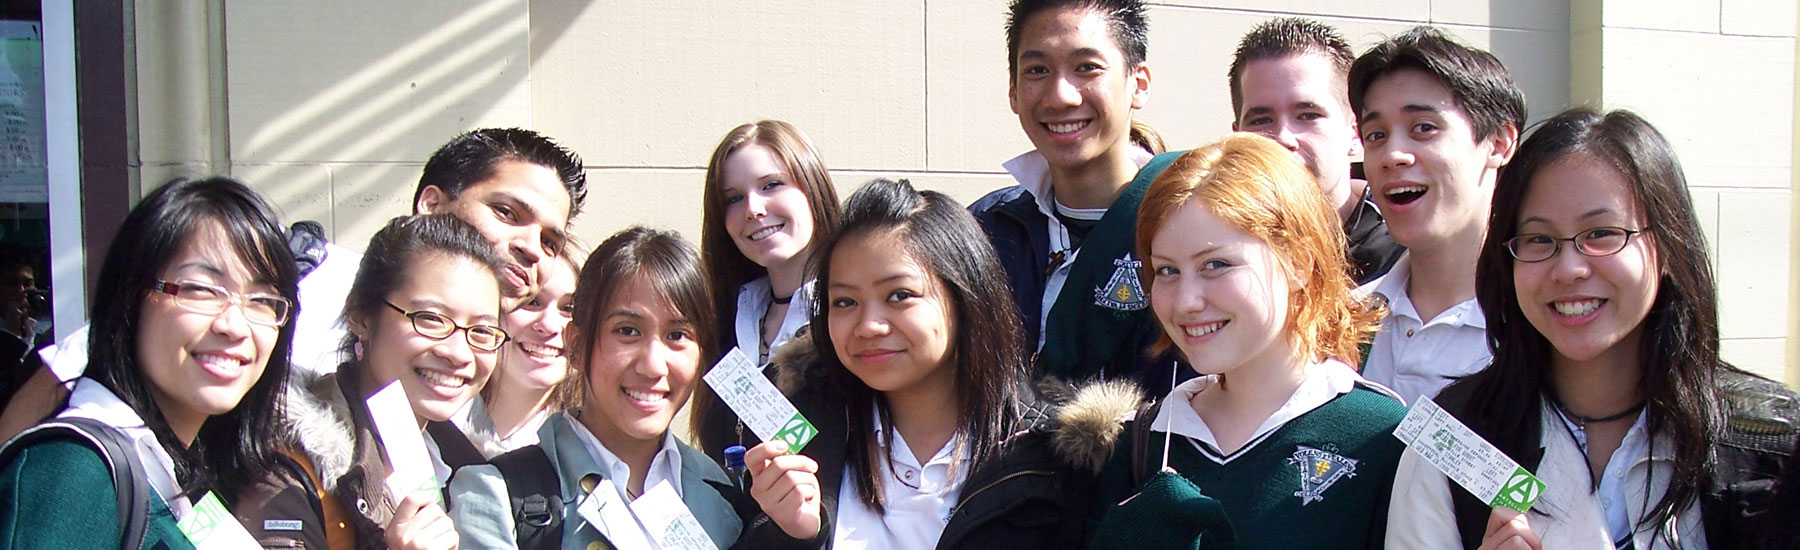 Photo of a group of smiling students holding up Arts Club Theatre Company show tickets.